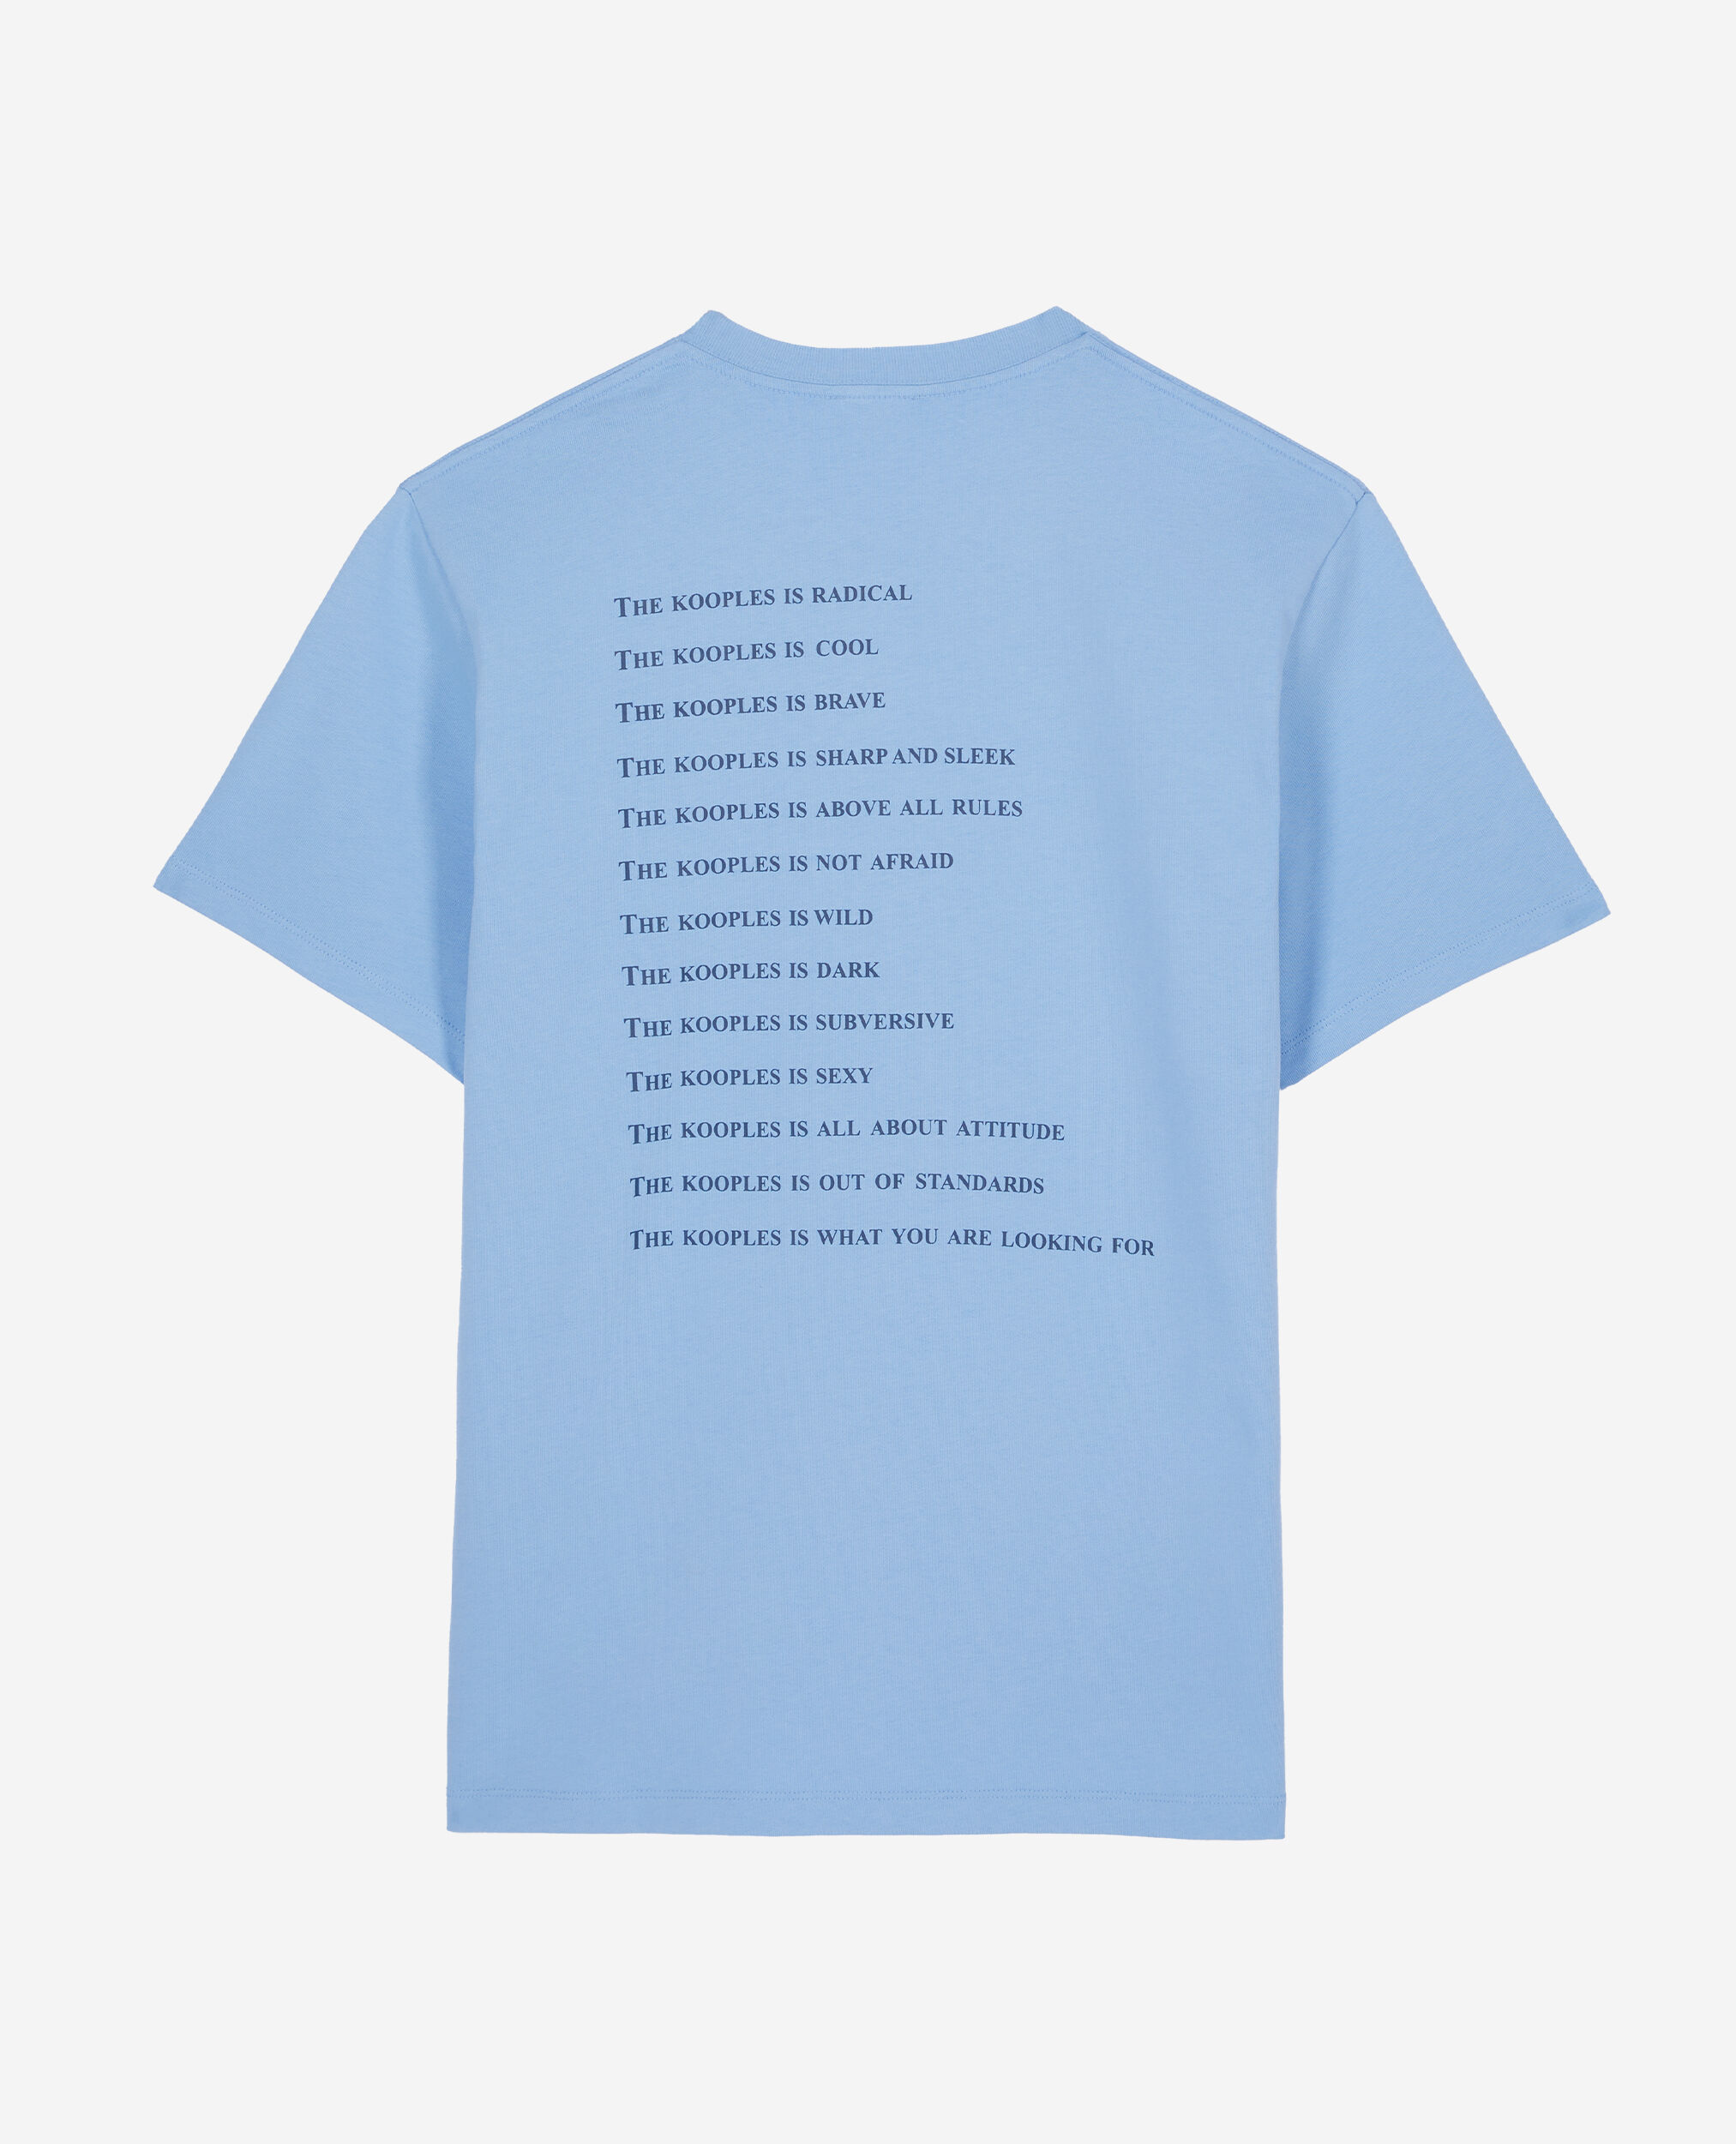 Camiseta What is azul cielo, STEEL BLUE, hi-res image number null